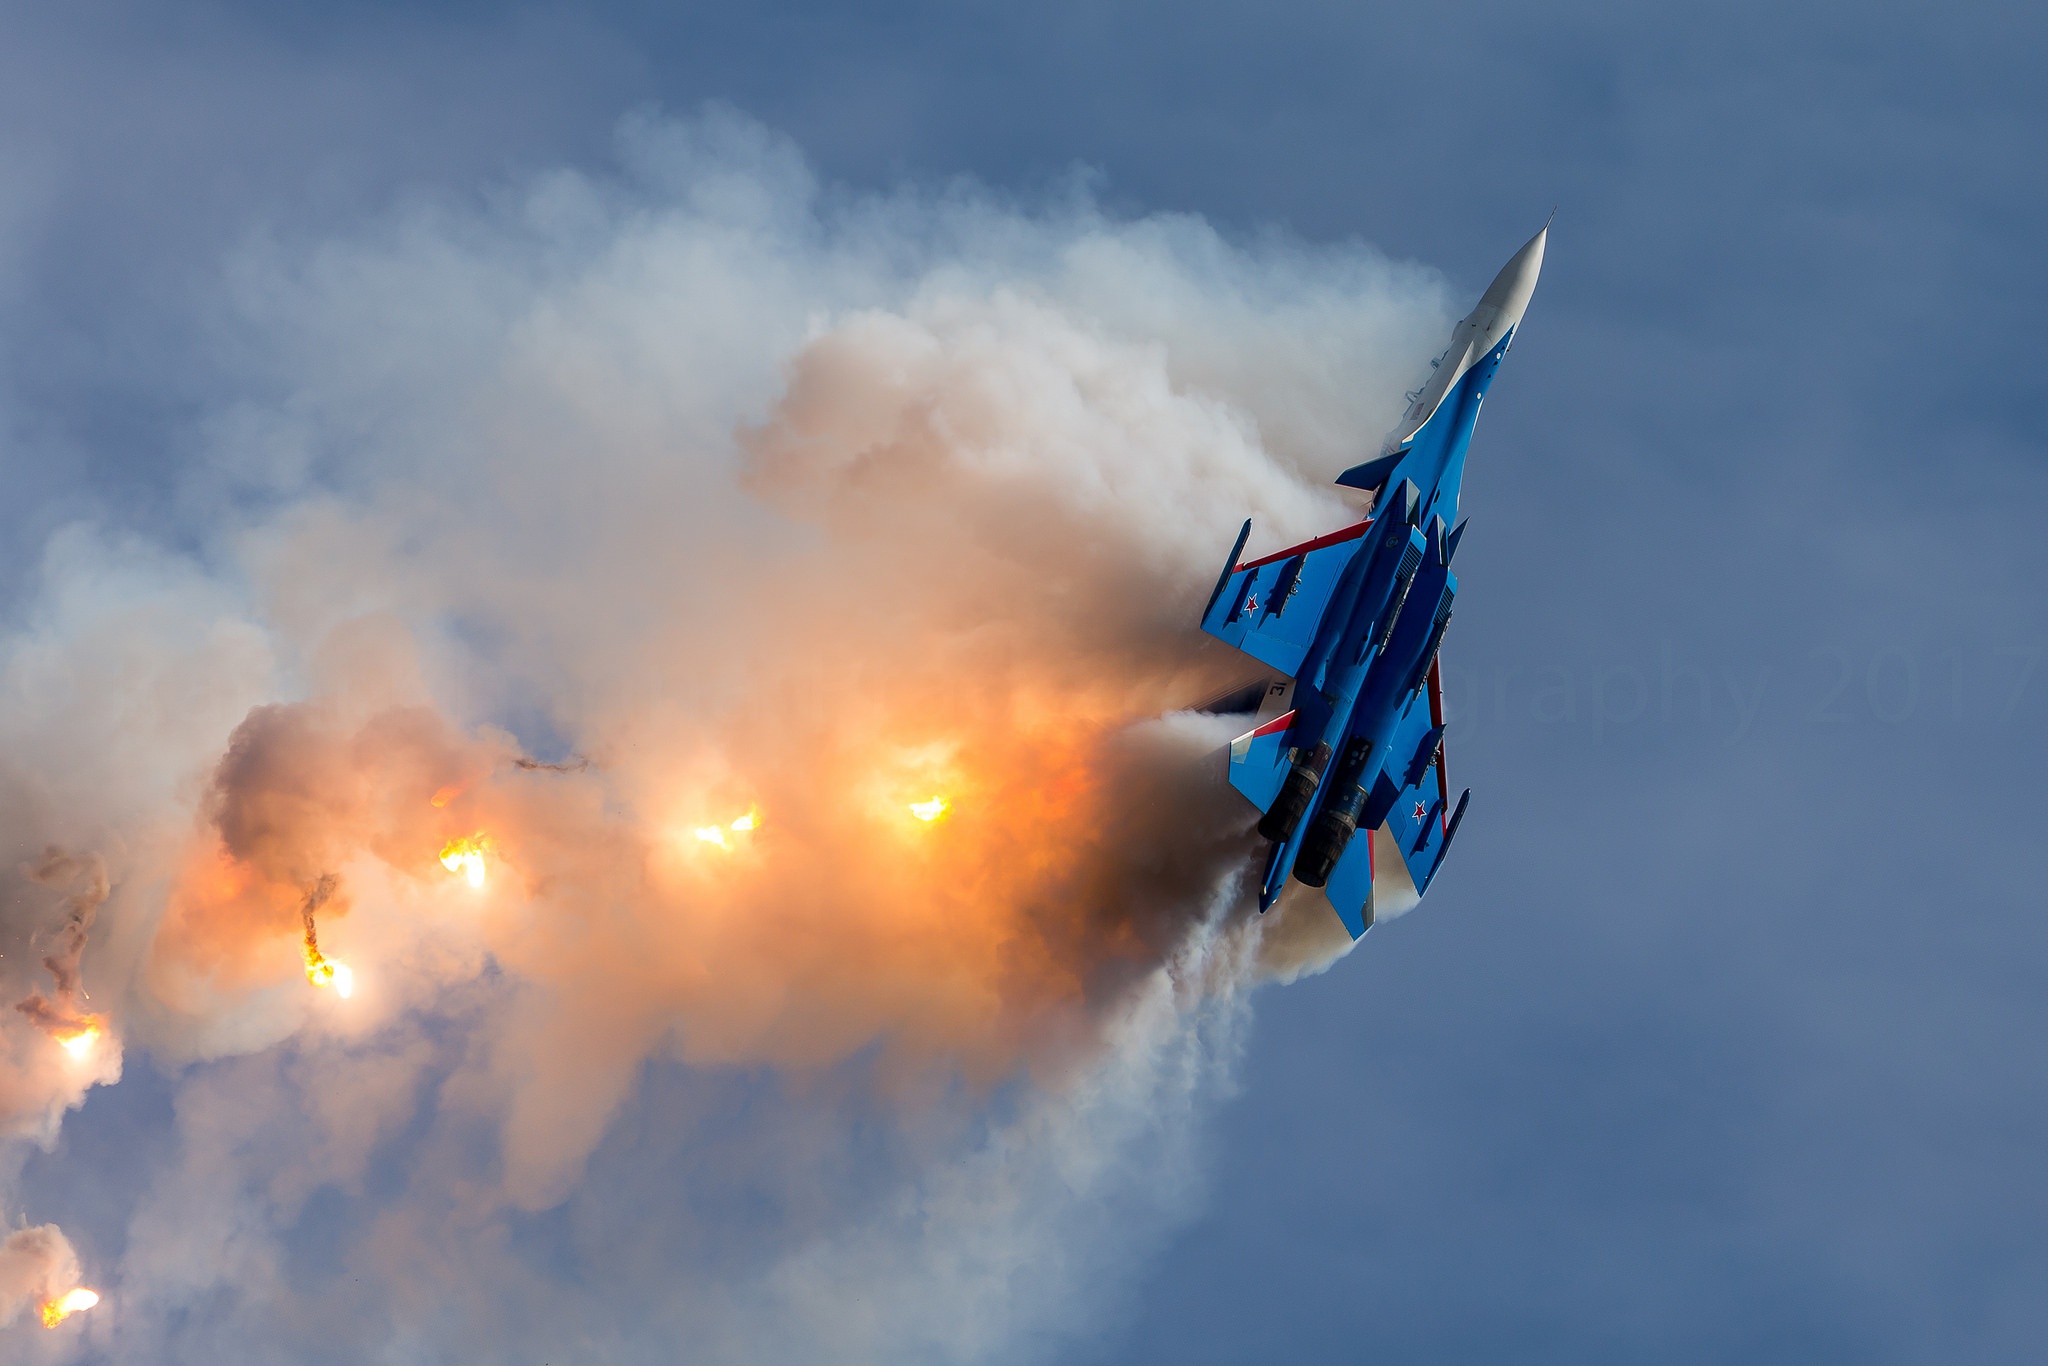 General 2048x1366 fire military aircraft aircraft vehicle military vehicle burning jet fighter Sukhoi Su-30 Russian Air Force Russian Knights flares watermarked Russian/Soviet aircraft Sukhoi